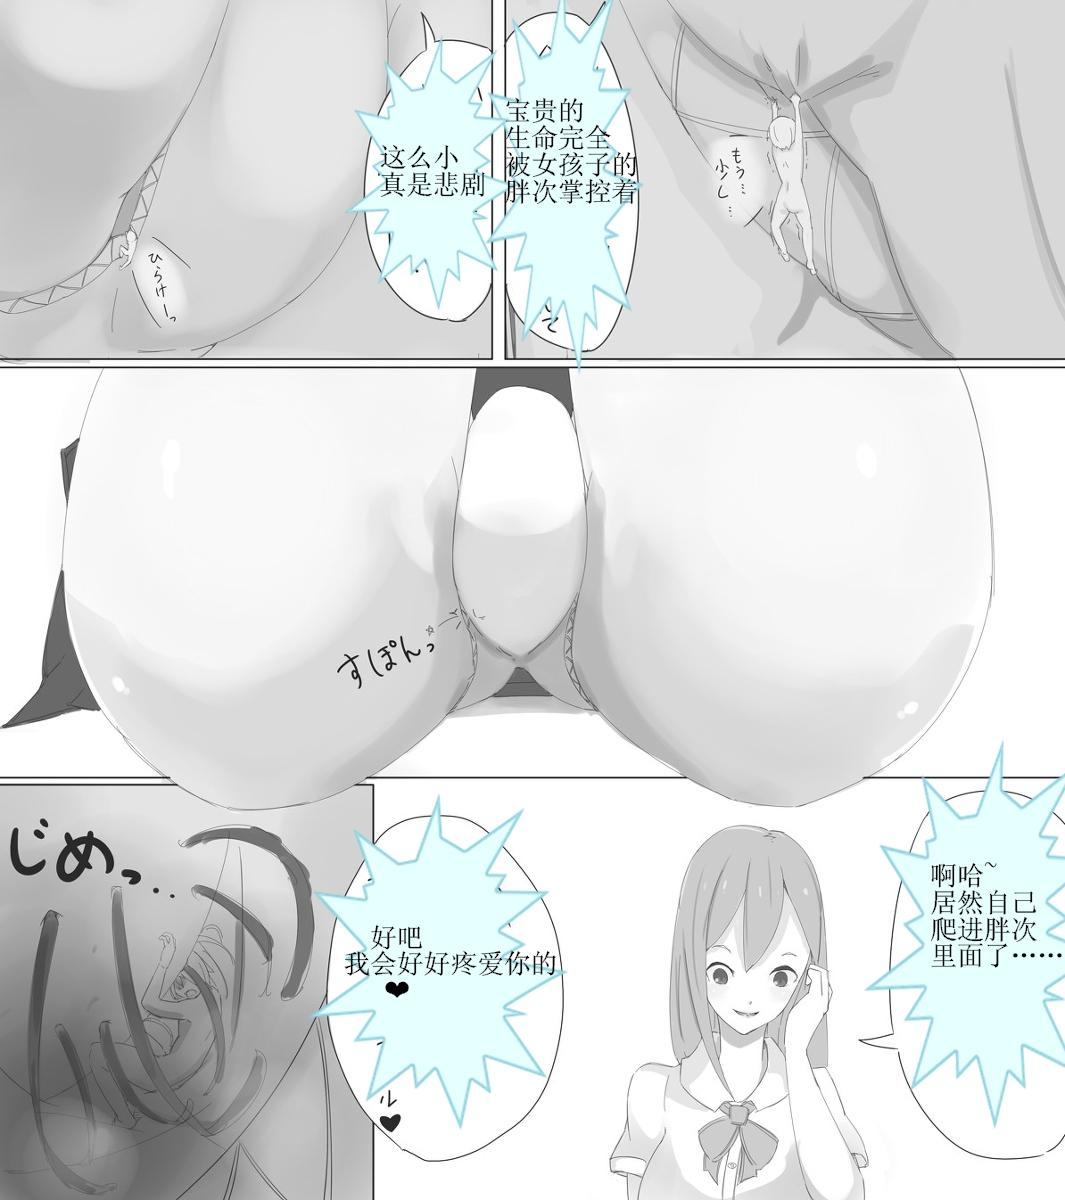 Best Blowjobs Ever シュパンツ漫画 Private Sex - Page 3